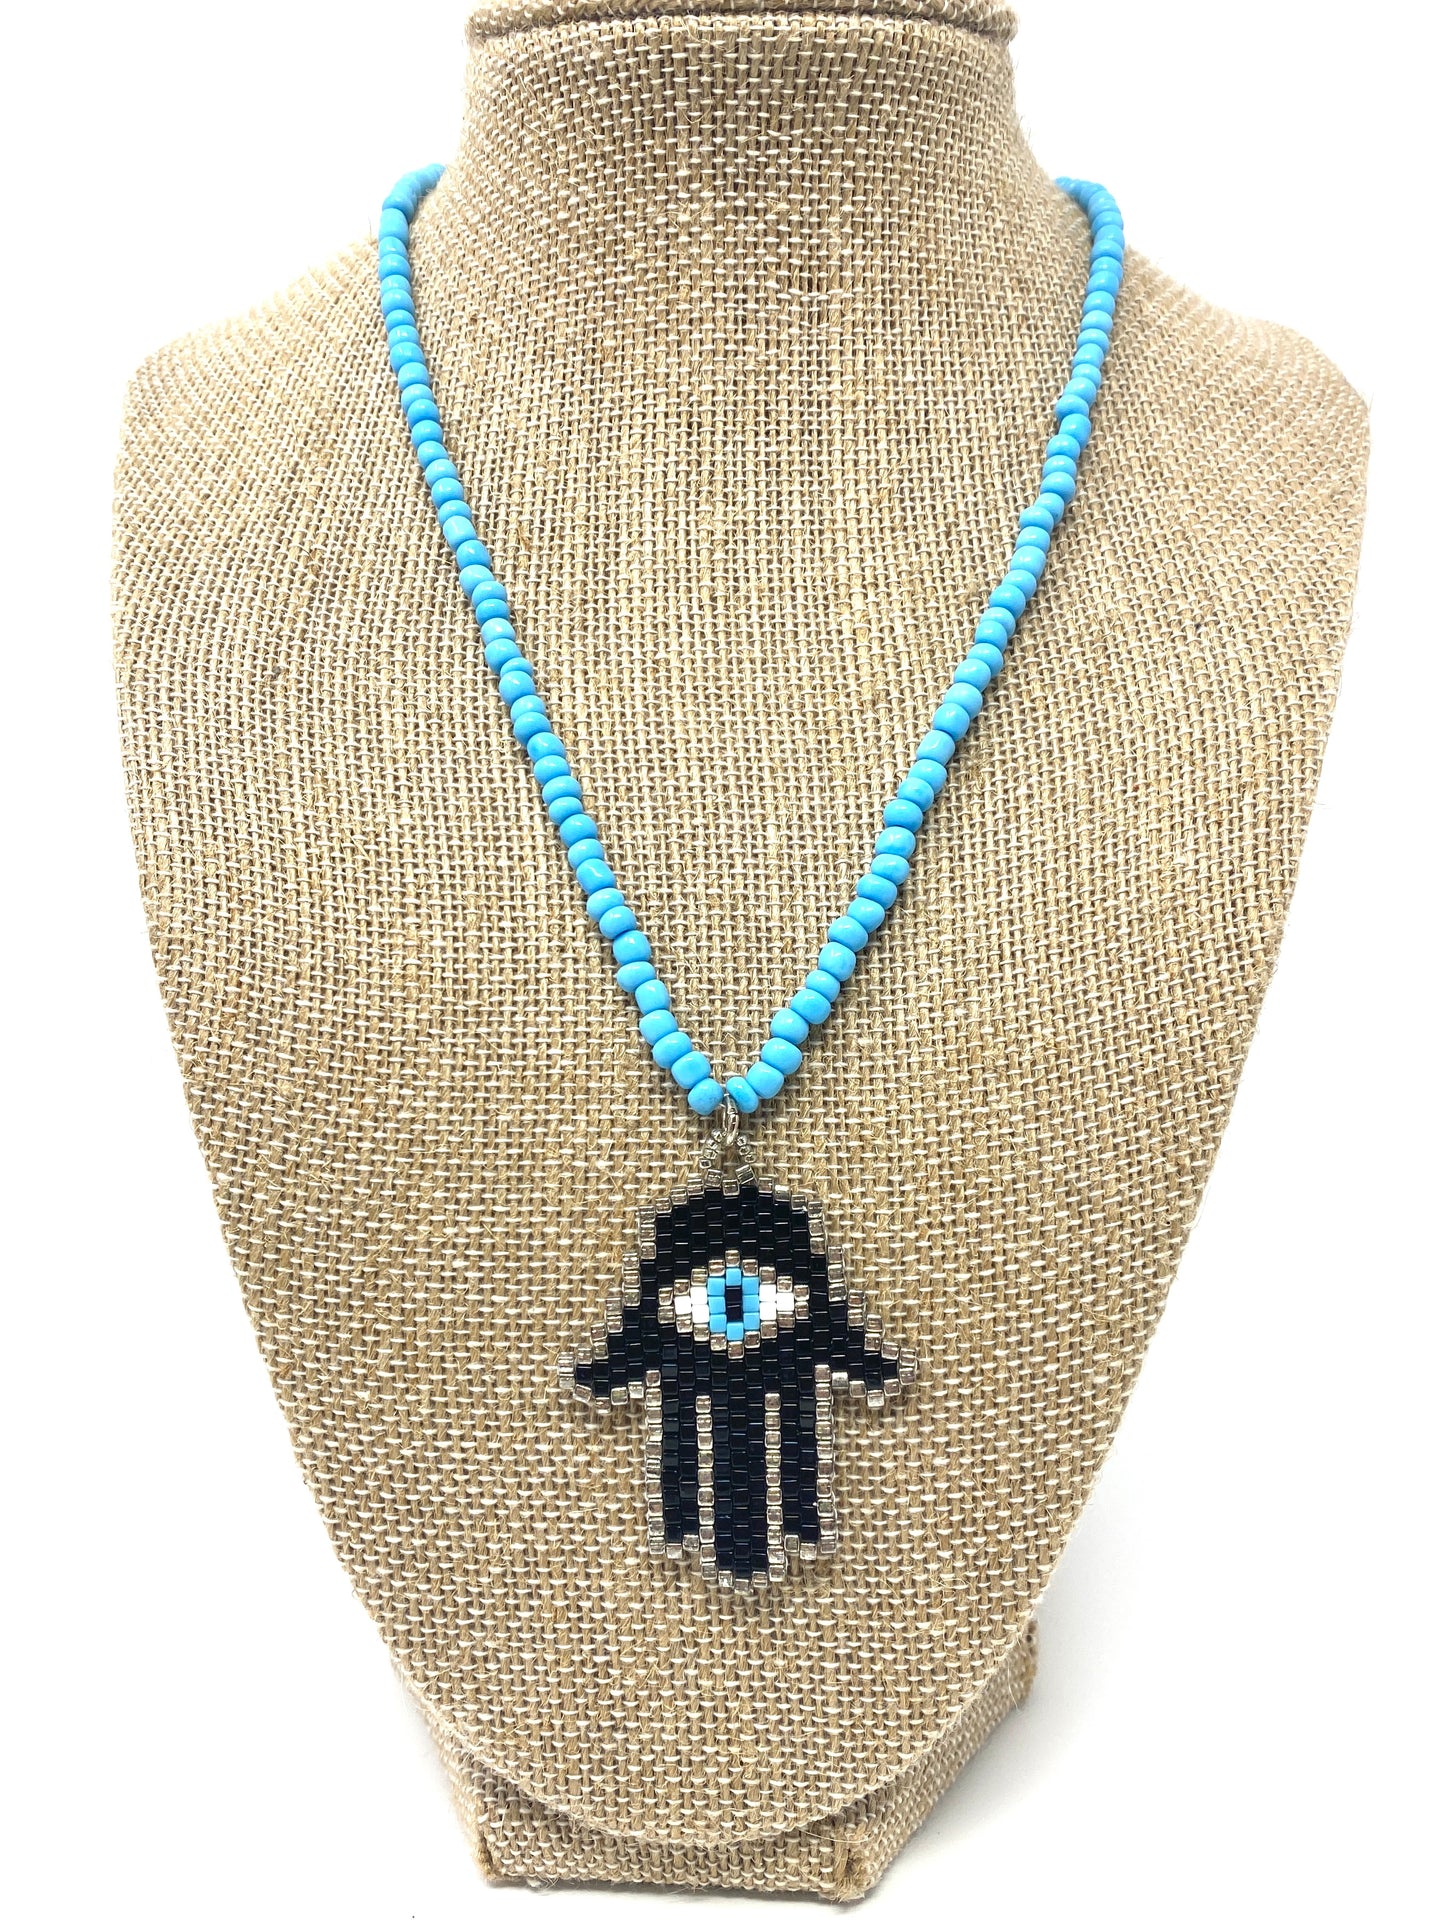 Blue Turquoise Seed Bead Necklace With Beaded Hamsa Pendant